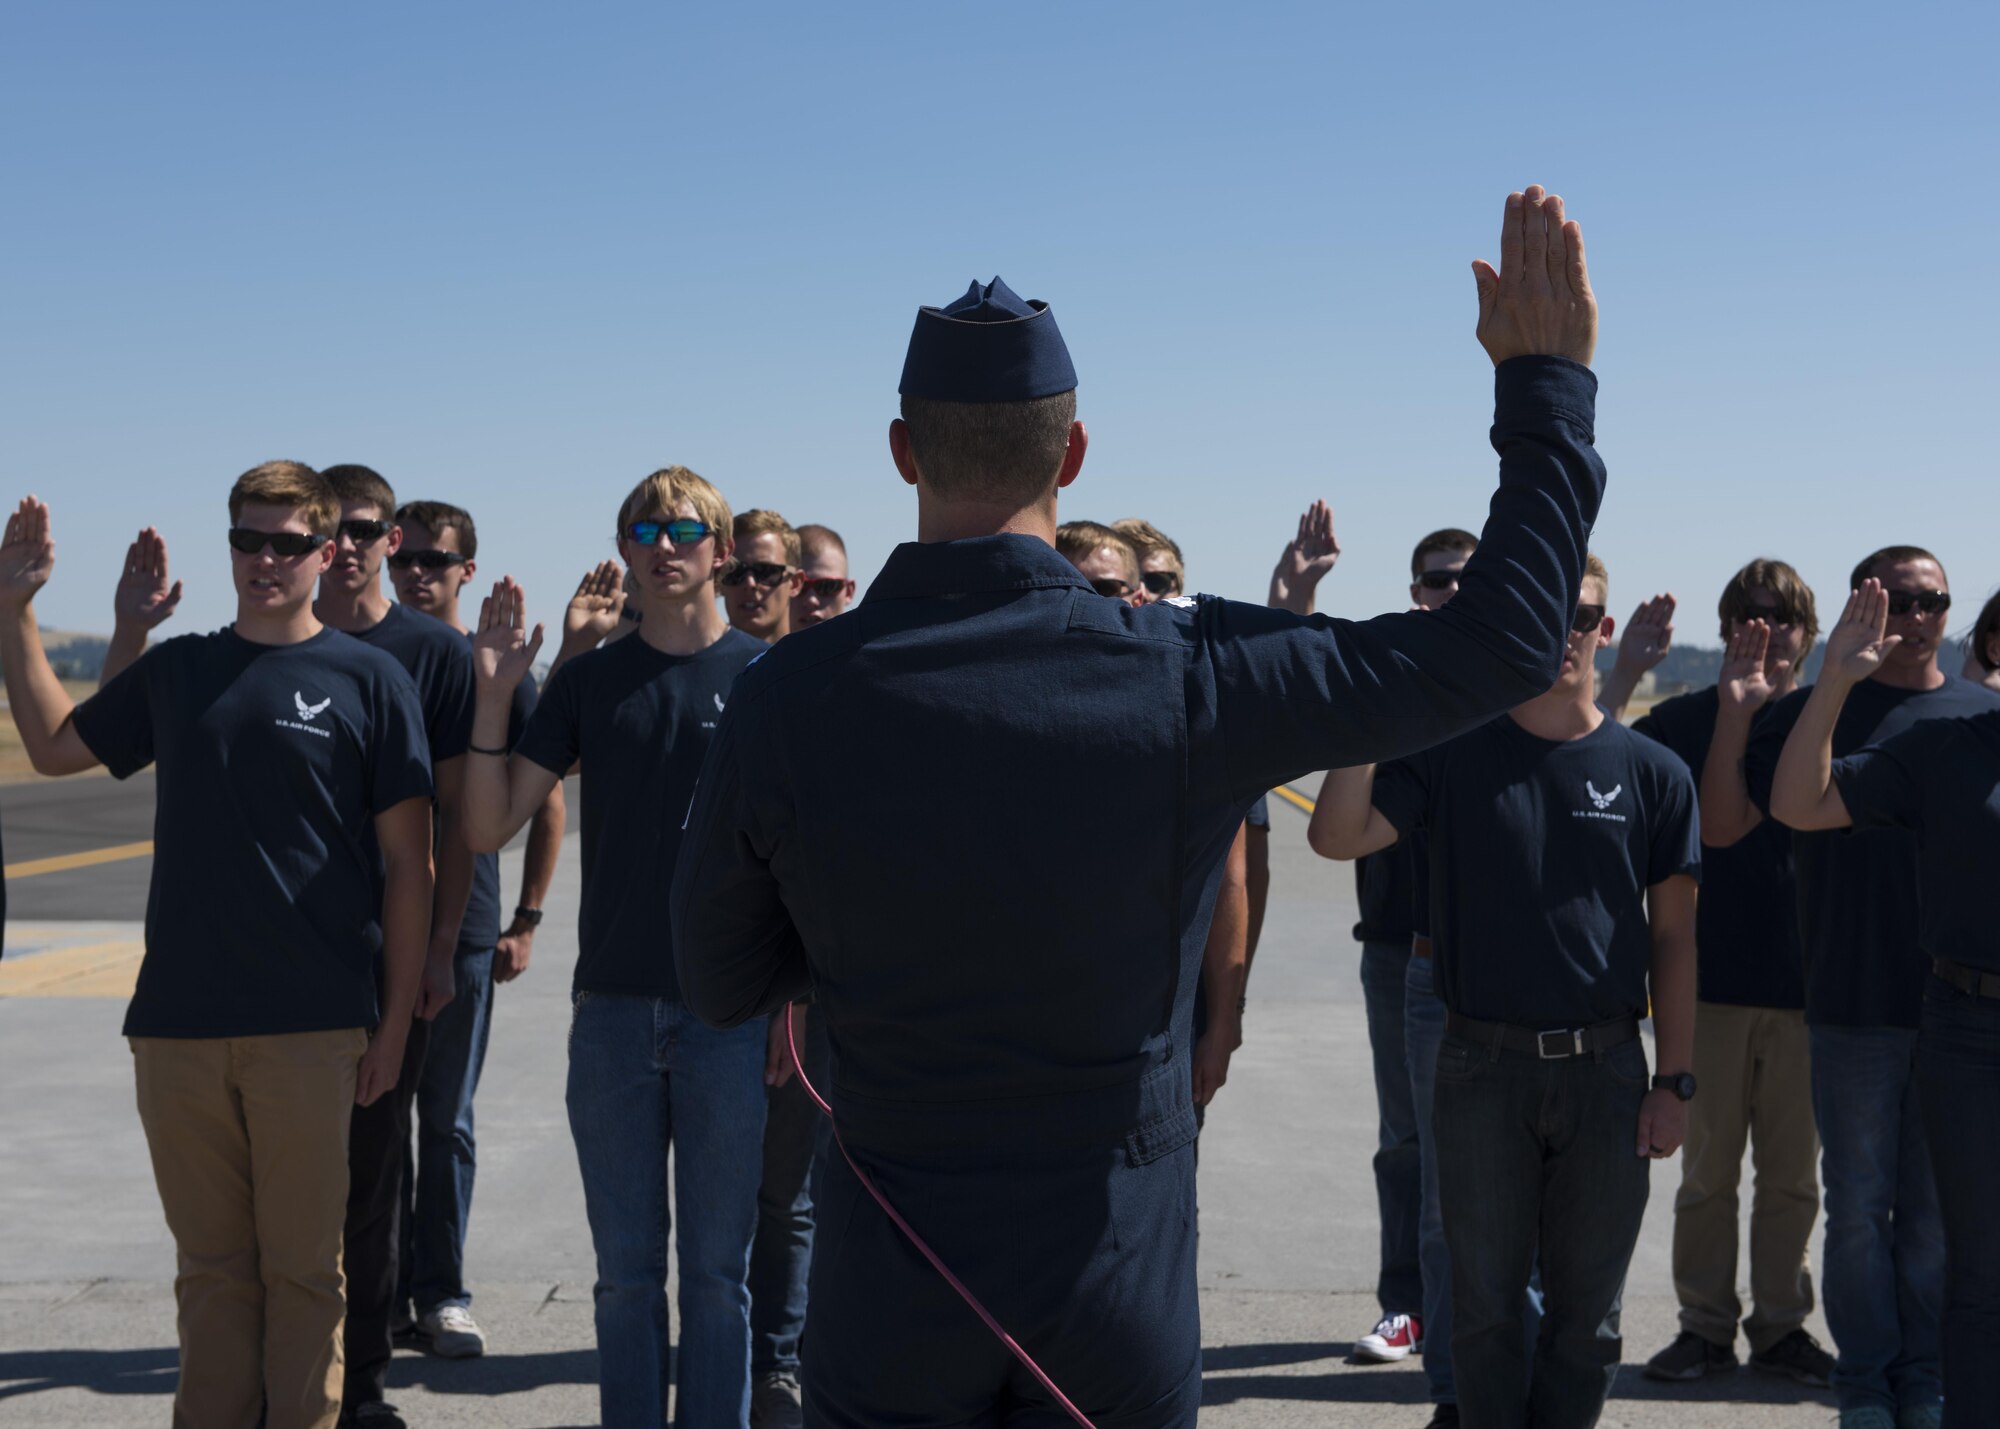 Lt. Col. Jason Heard, U.S. Air Force Thunderbirds Air Demonstration Squadron commander, swears in new U.S. Air Force recruits at the Skyfest 2017 air show and open house July 29, 2017, at Fairchild Air Force Base, Washington. The Oath of Enlistment is a traditional pledge of service given by officers to new recruits. (U.S. Air Force photo / Airman 1st Class Ryan Lackey)